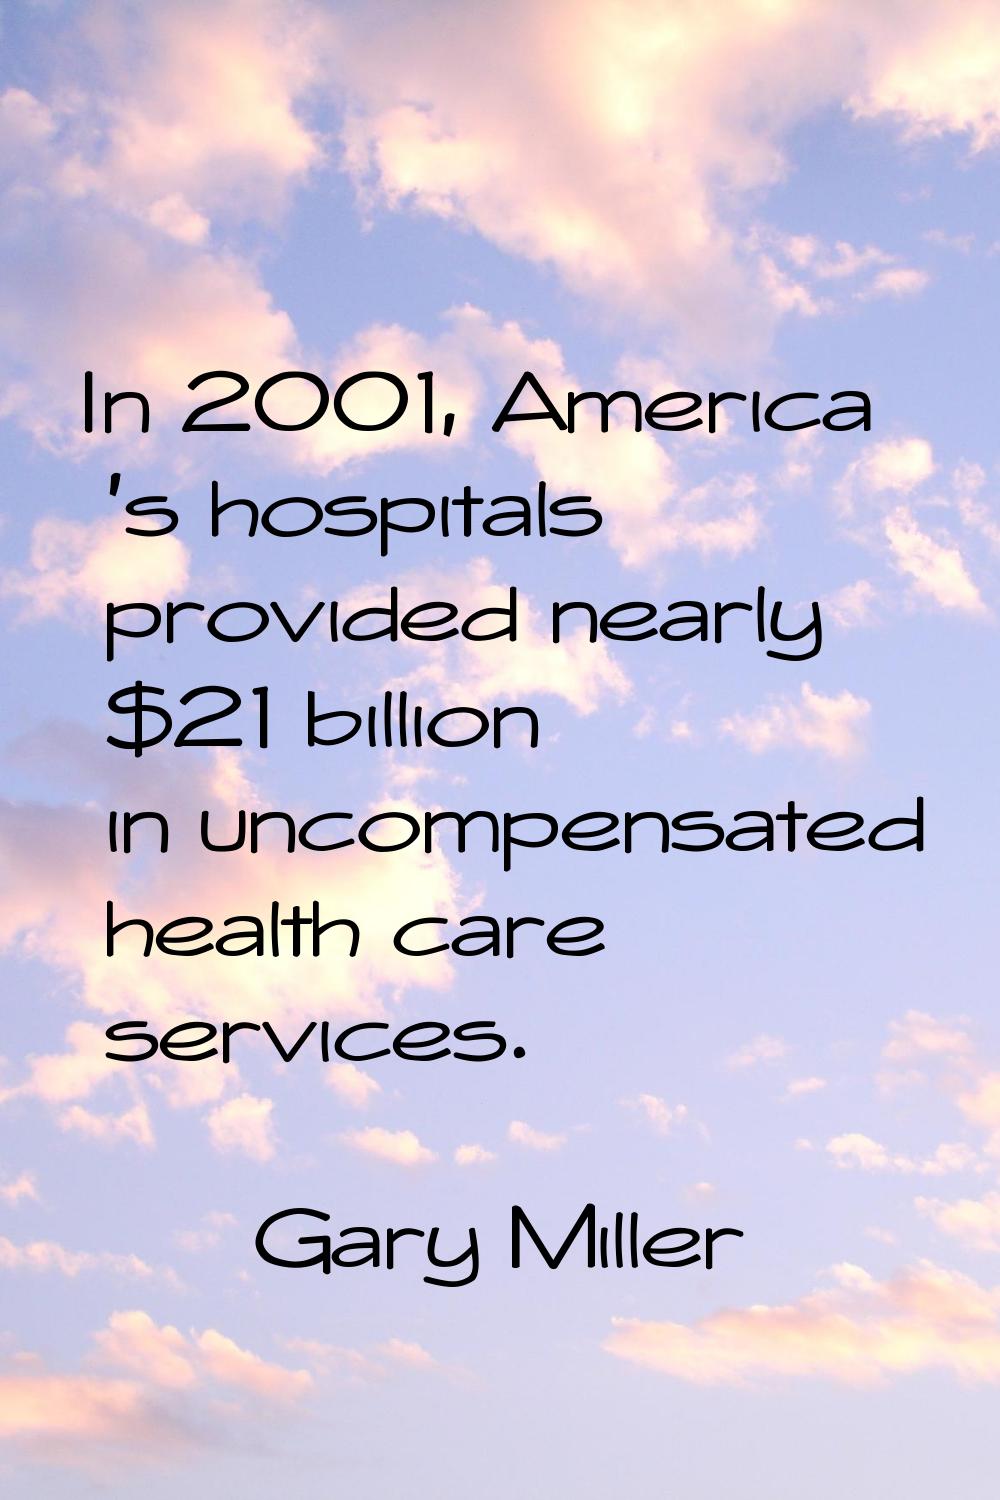 In 2001, America 's hospitals provided nearly $21 billion in uncompensated health care services.